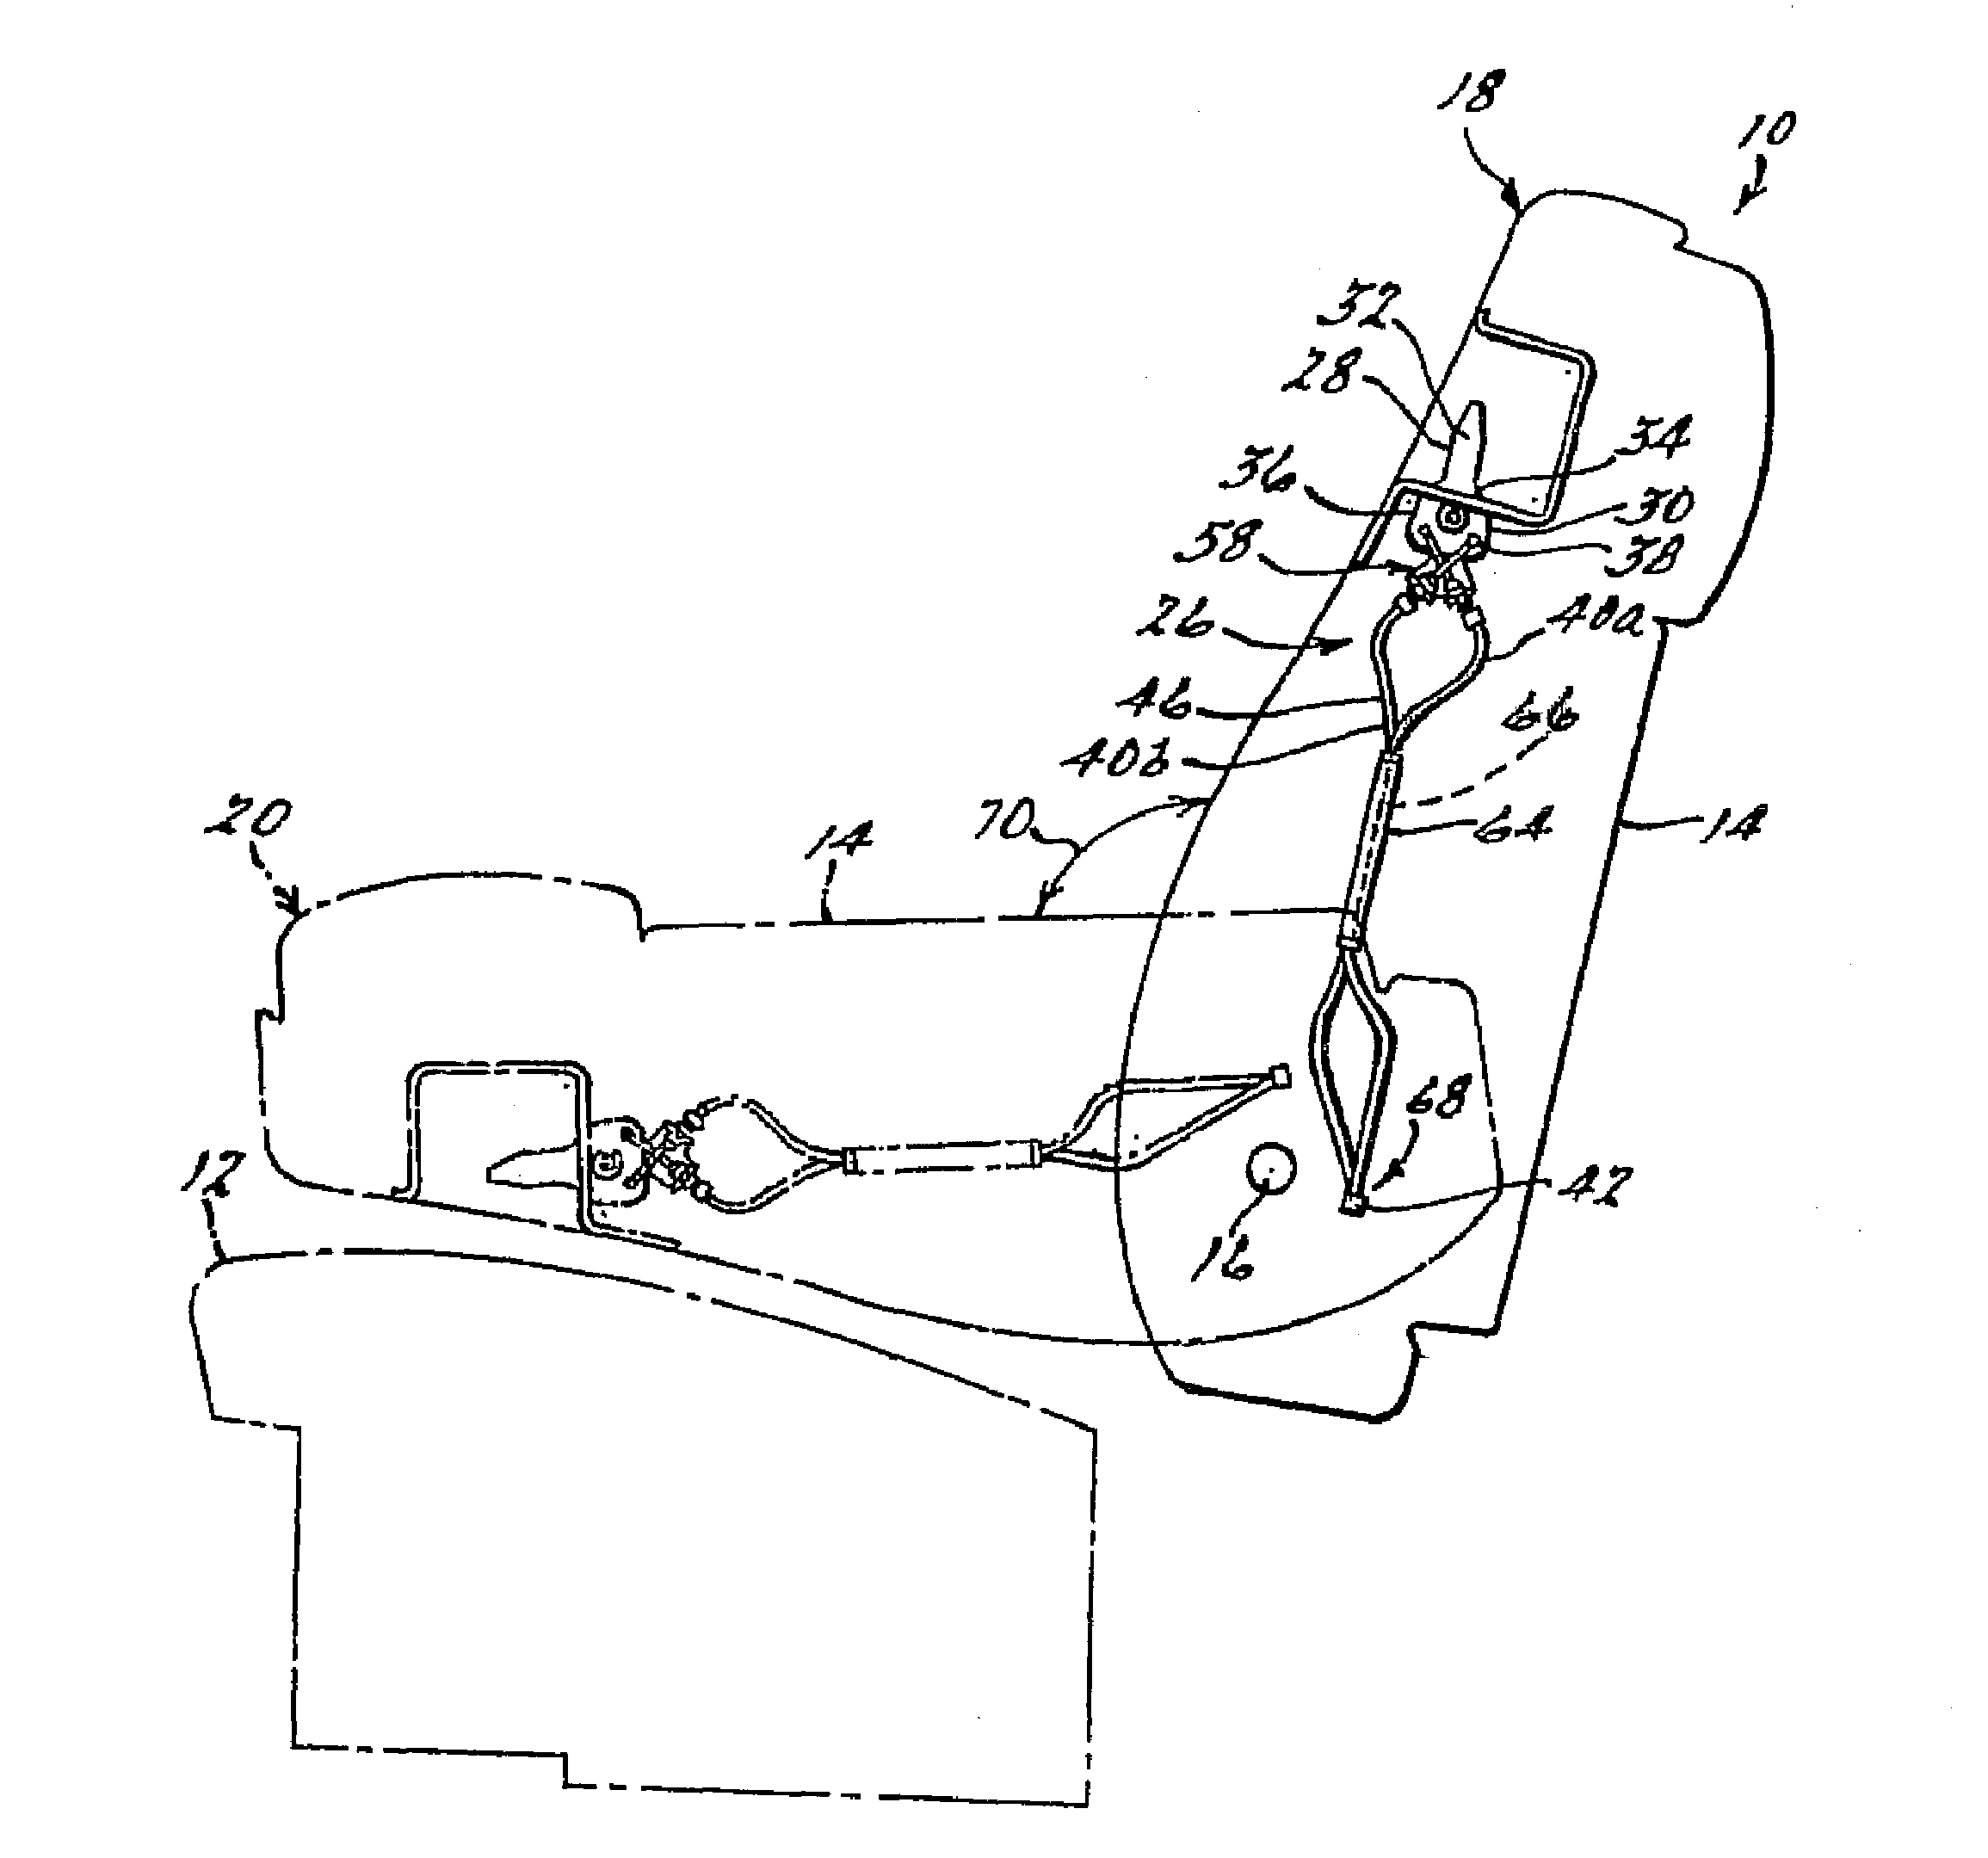 Dual action seat release mechanism